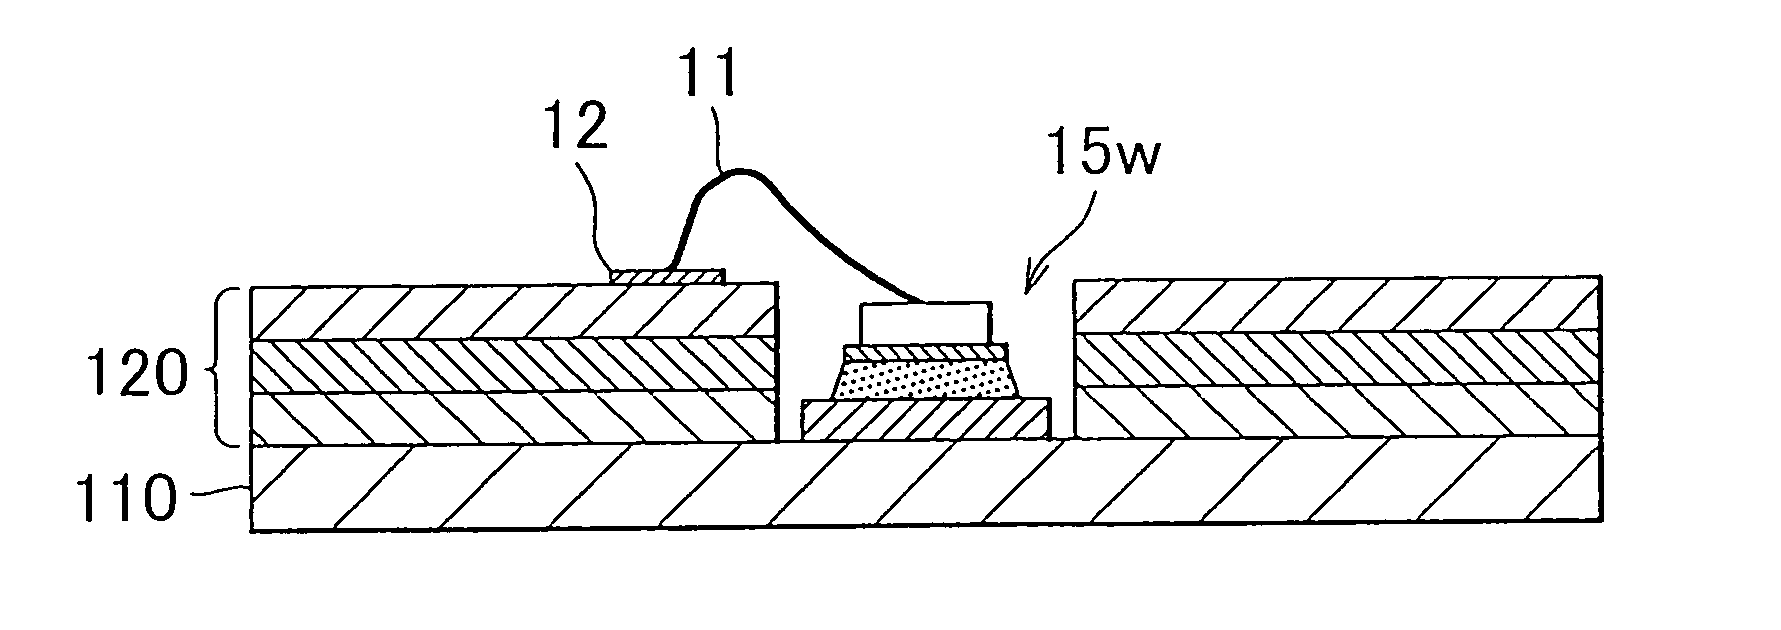 Multilayer circuit substrate